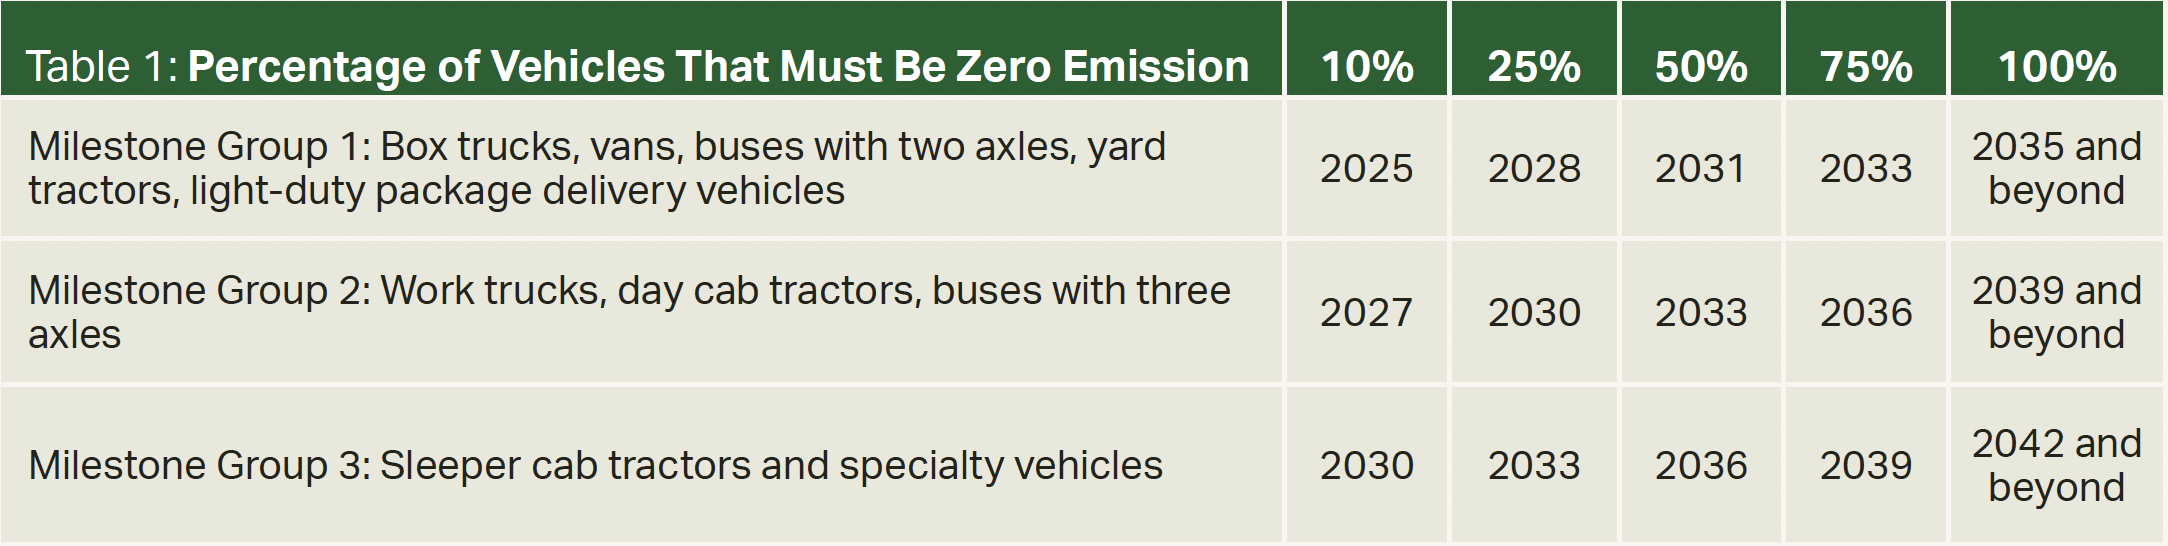 Table Percentage of Vehicles That Must Be Zero Emission